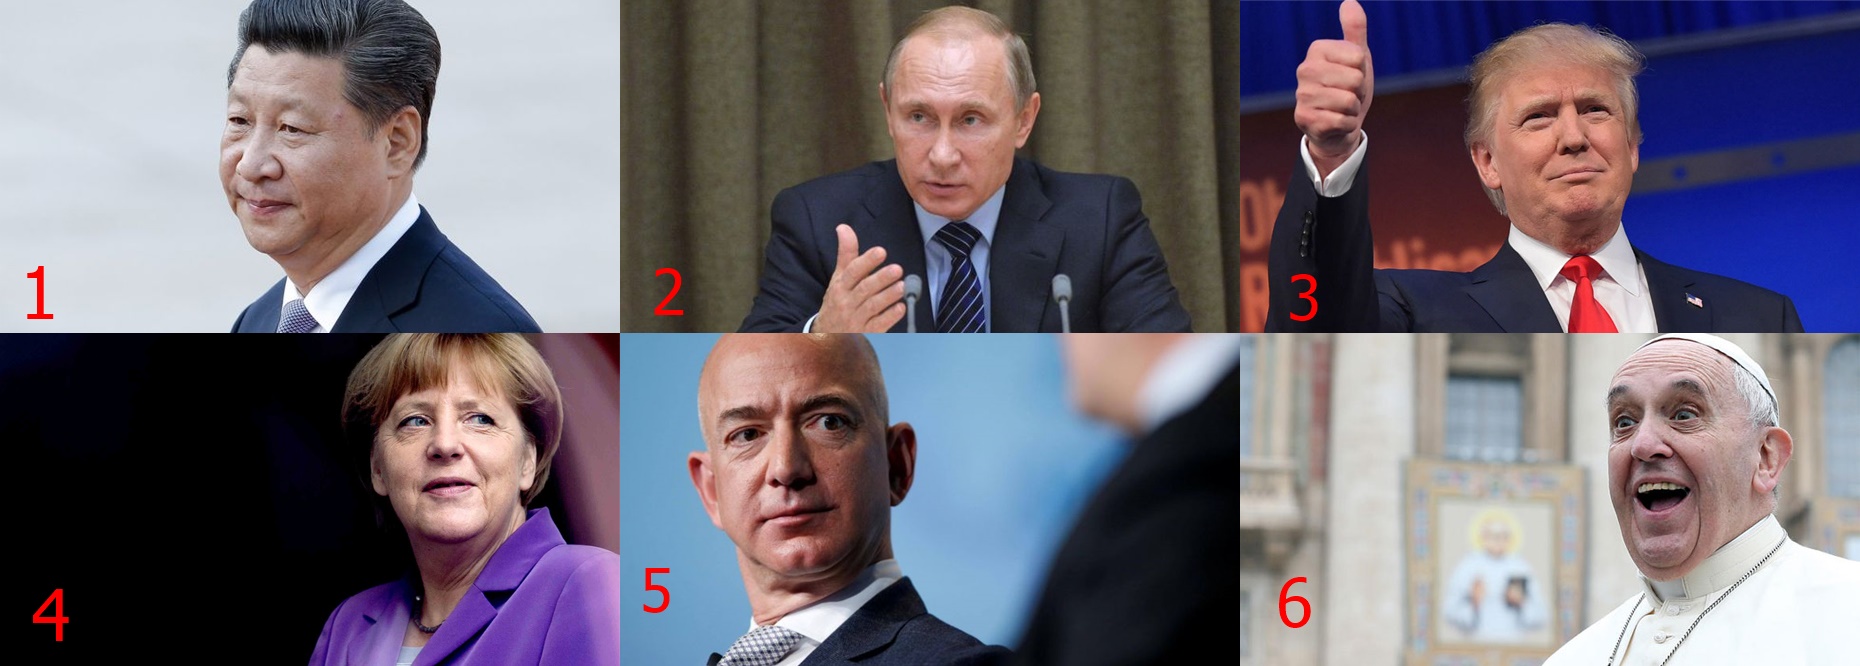 Top 6 Most Powerful People In The World | See 2019 Full List